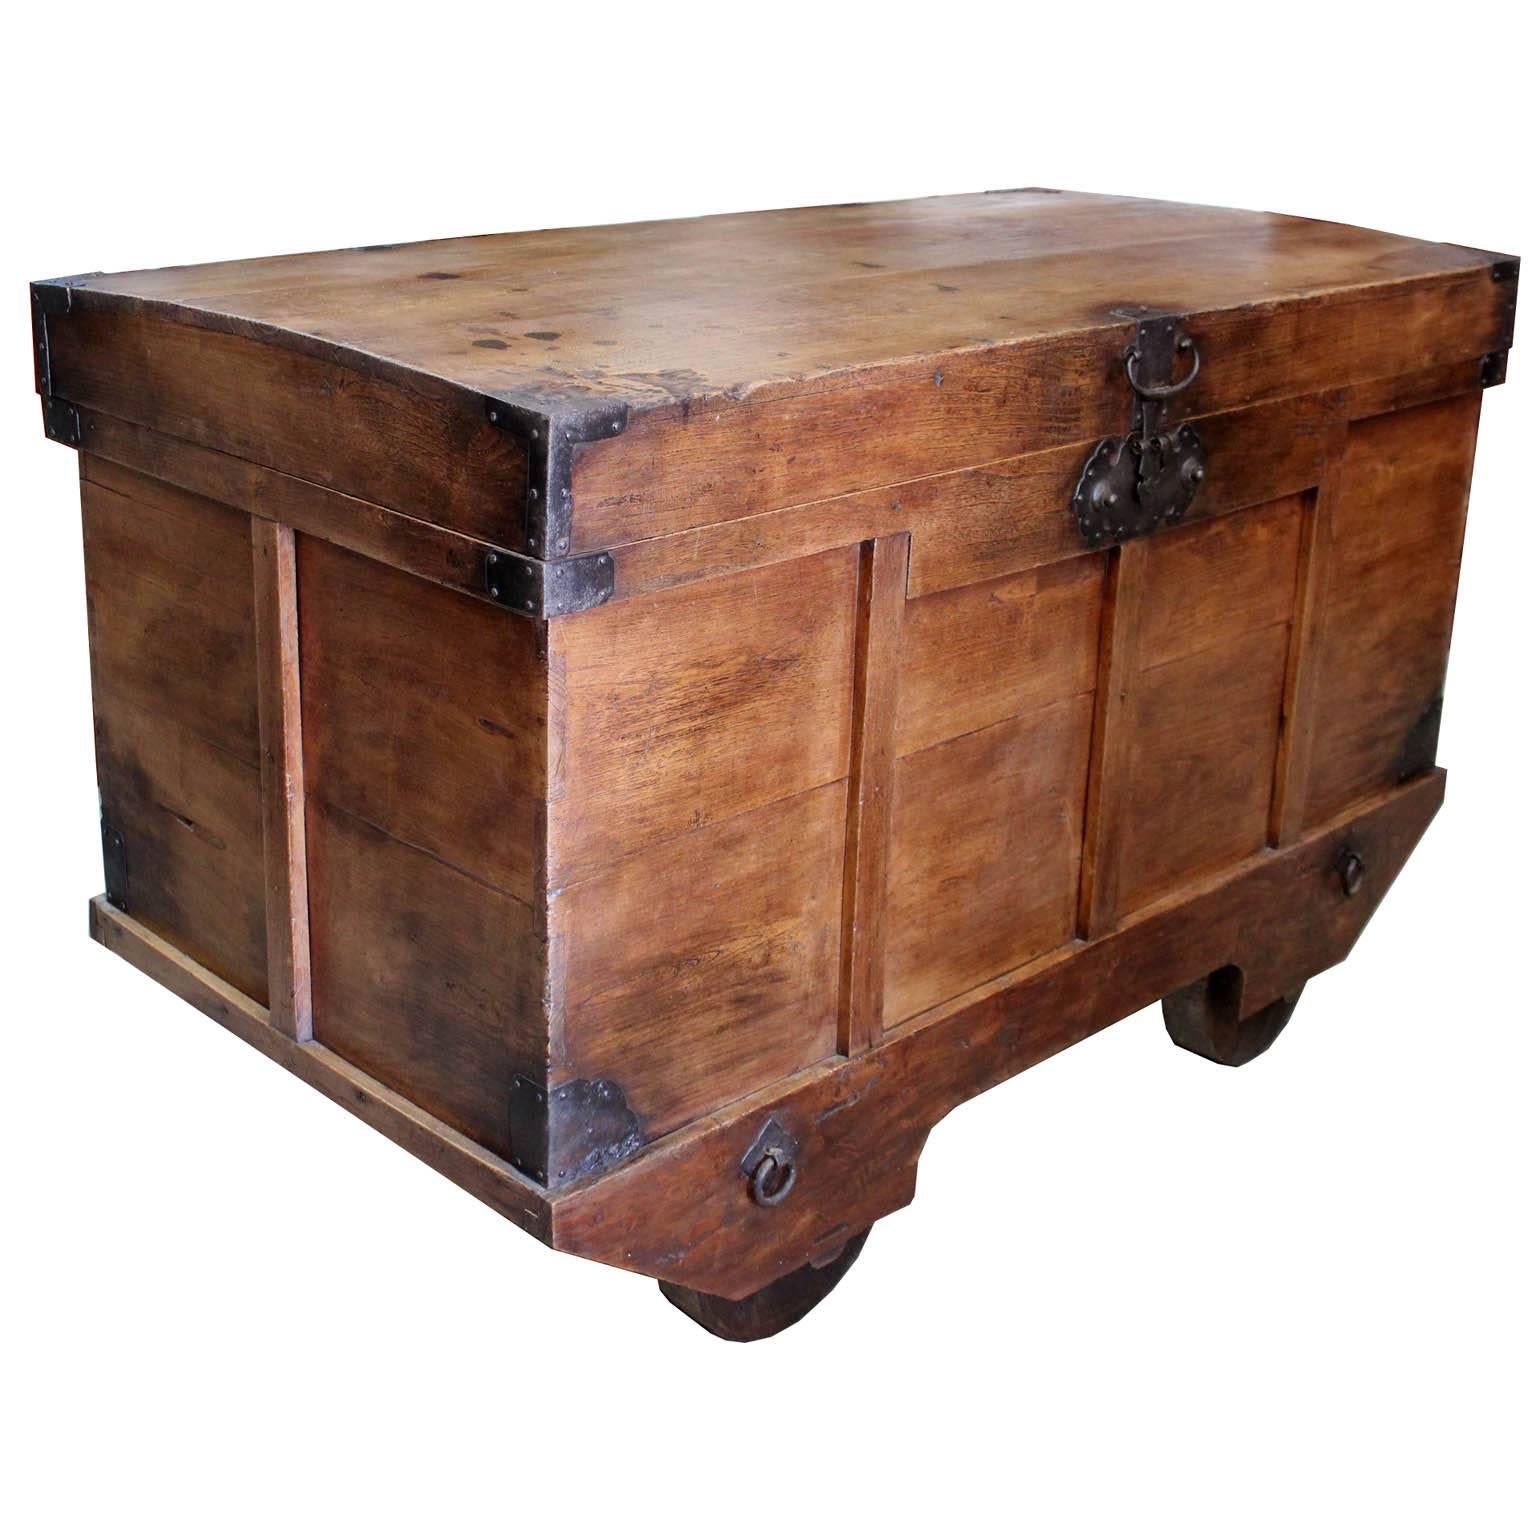 Original Japanese Nagamochi dansu from northern Japan used to store extra blankets and clothing inside the wheeled trunk. Wooden wheels were used to transport the tansu from the house in case of a fire. Sugi (cedar) wood and hand-forged iron